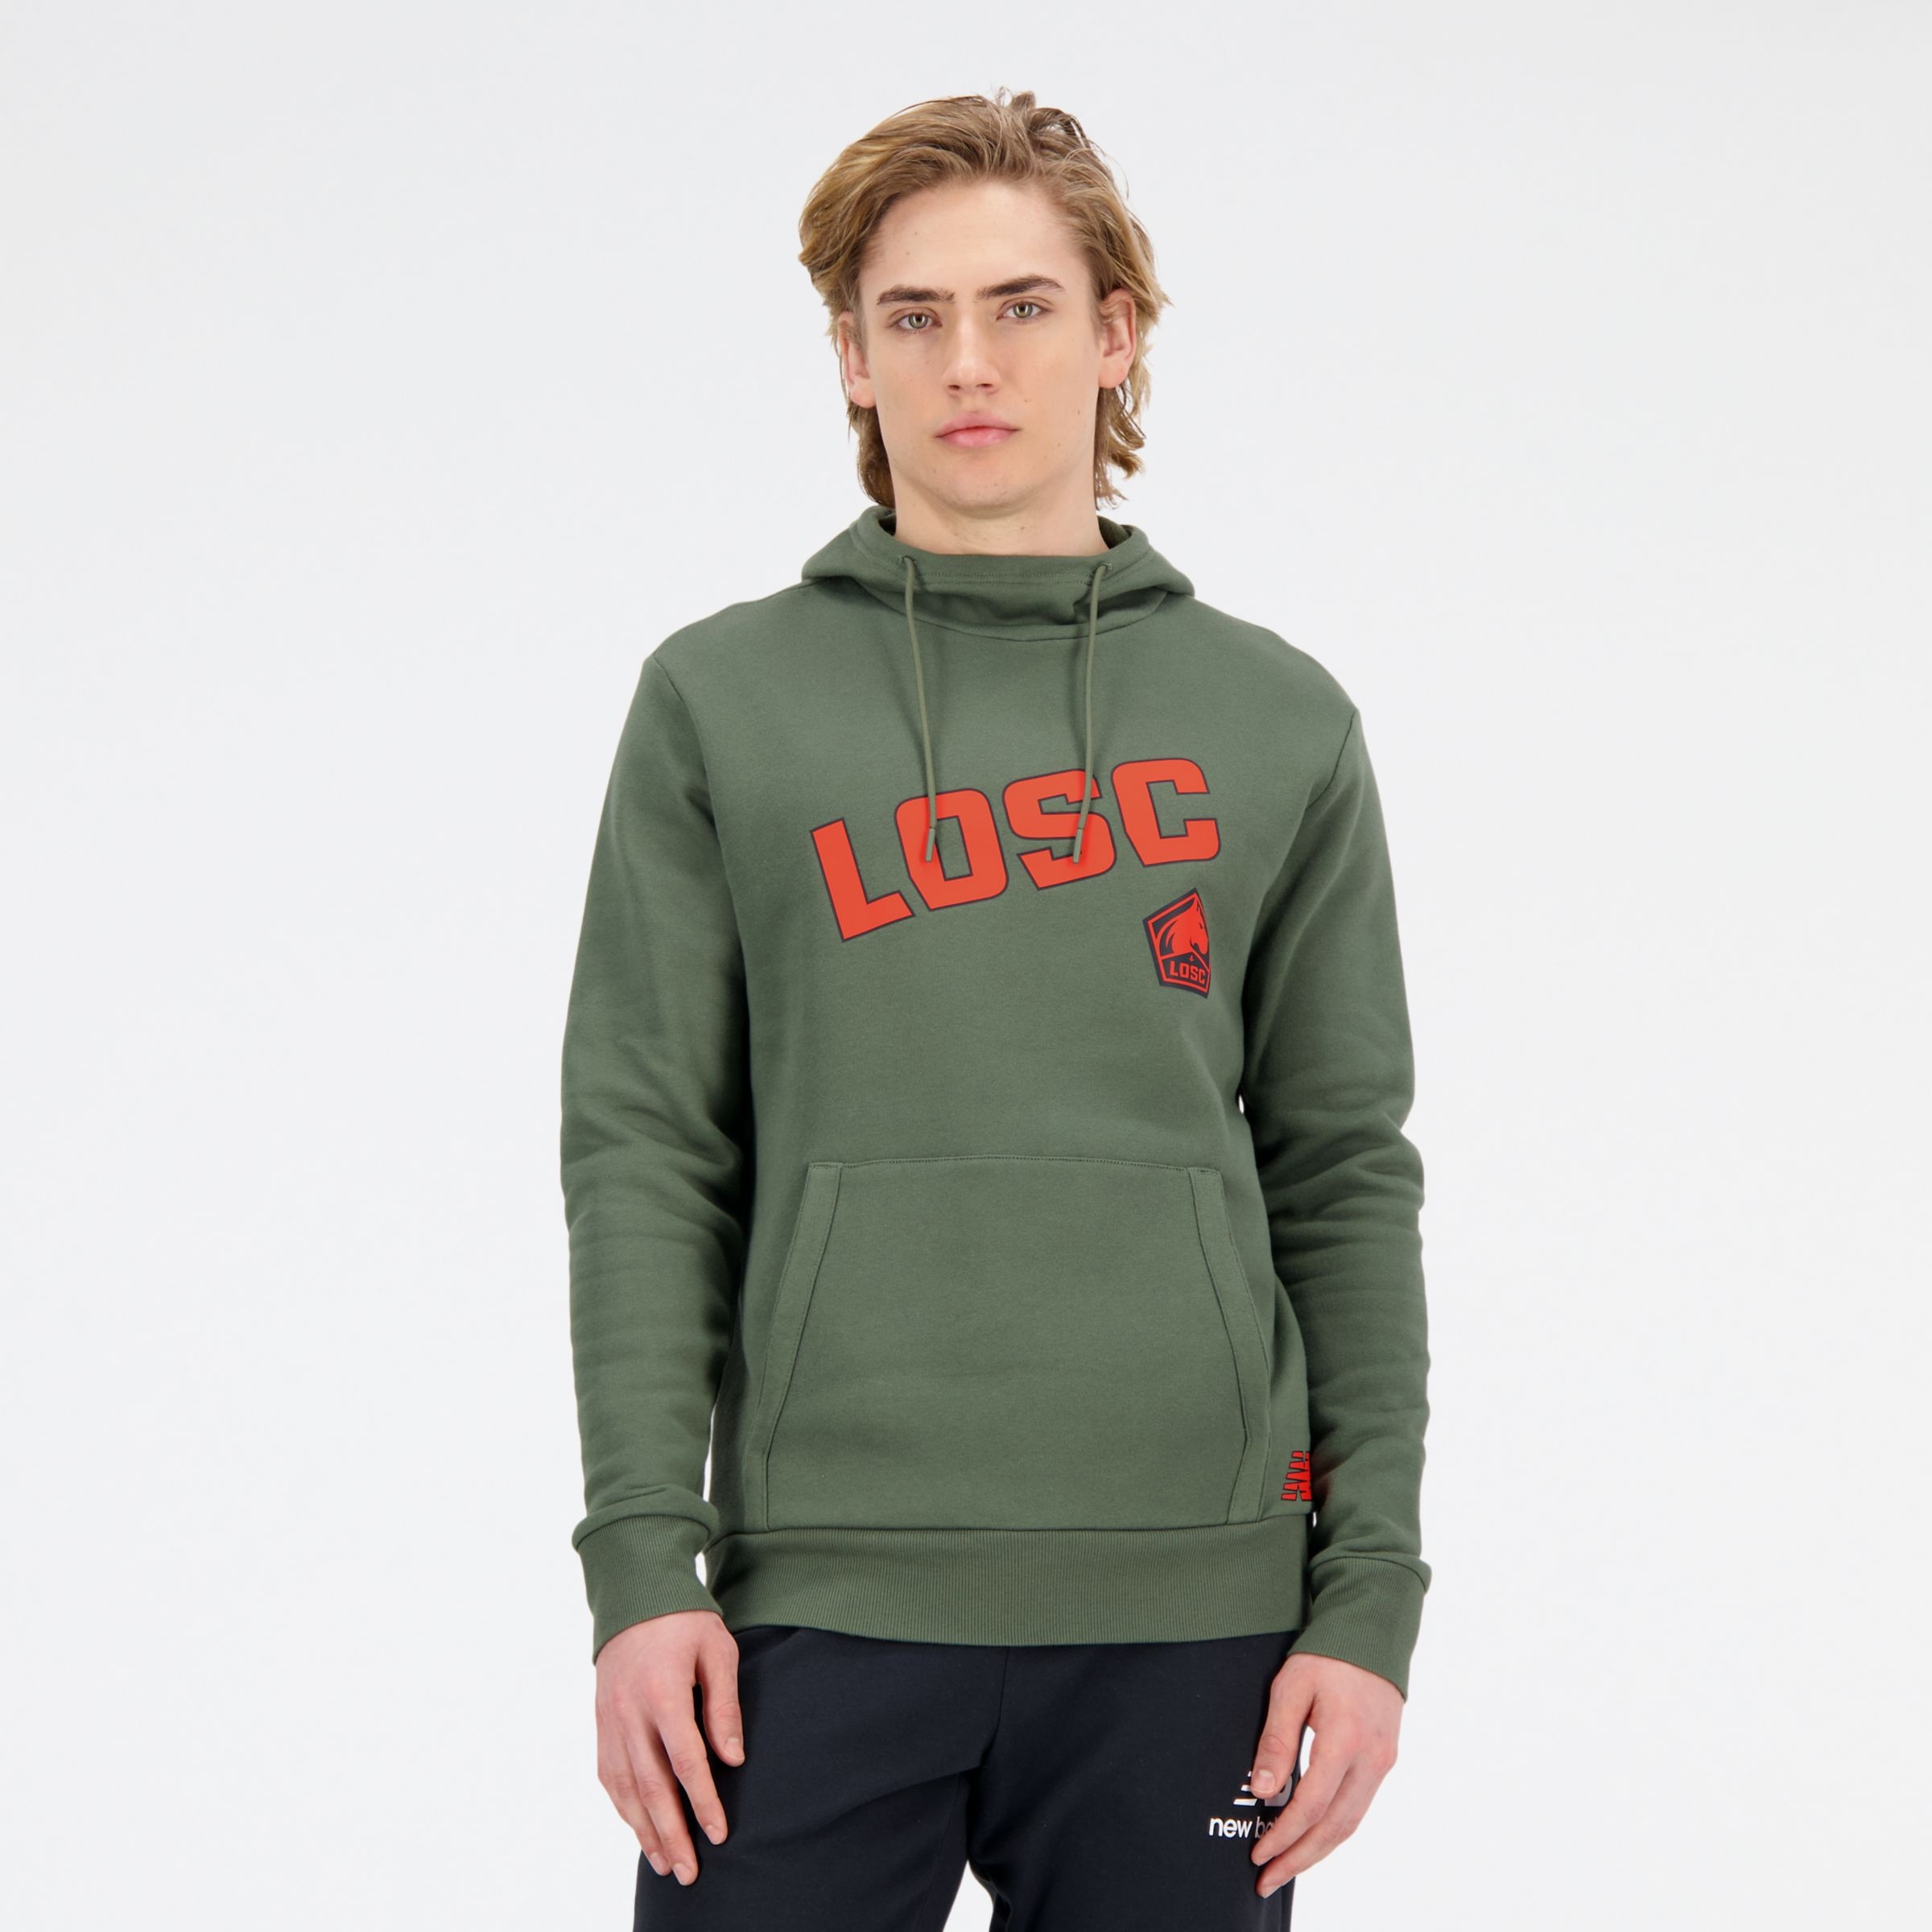 LOSC Lille Graphic Overhead Hoodie - 1